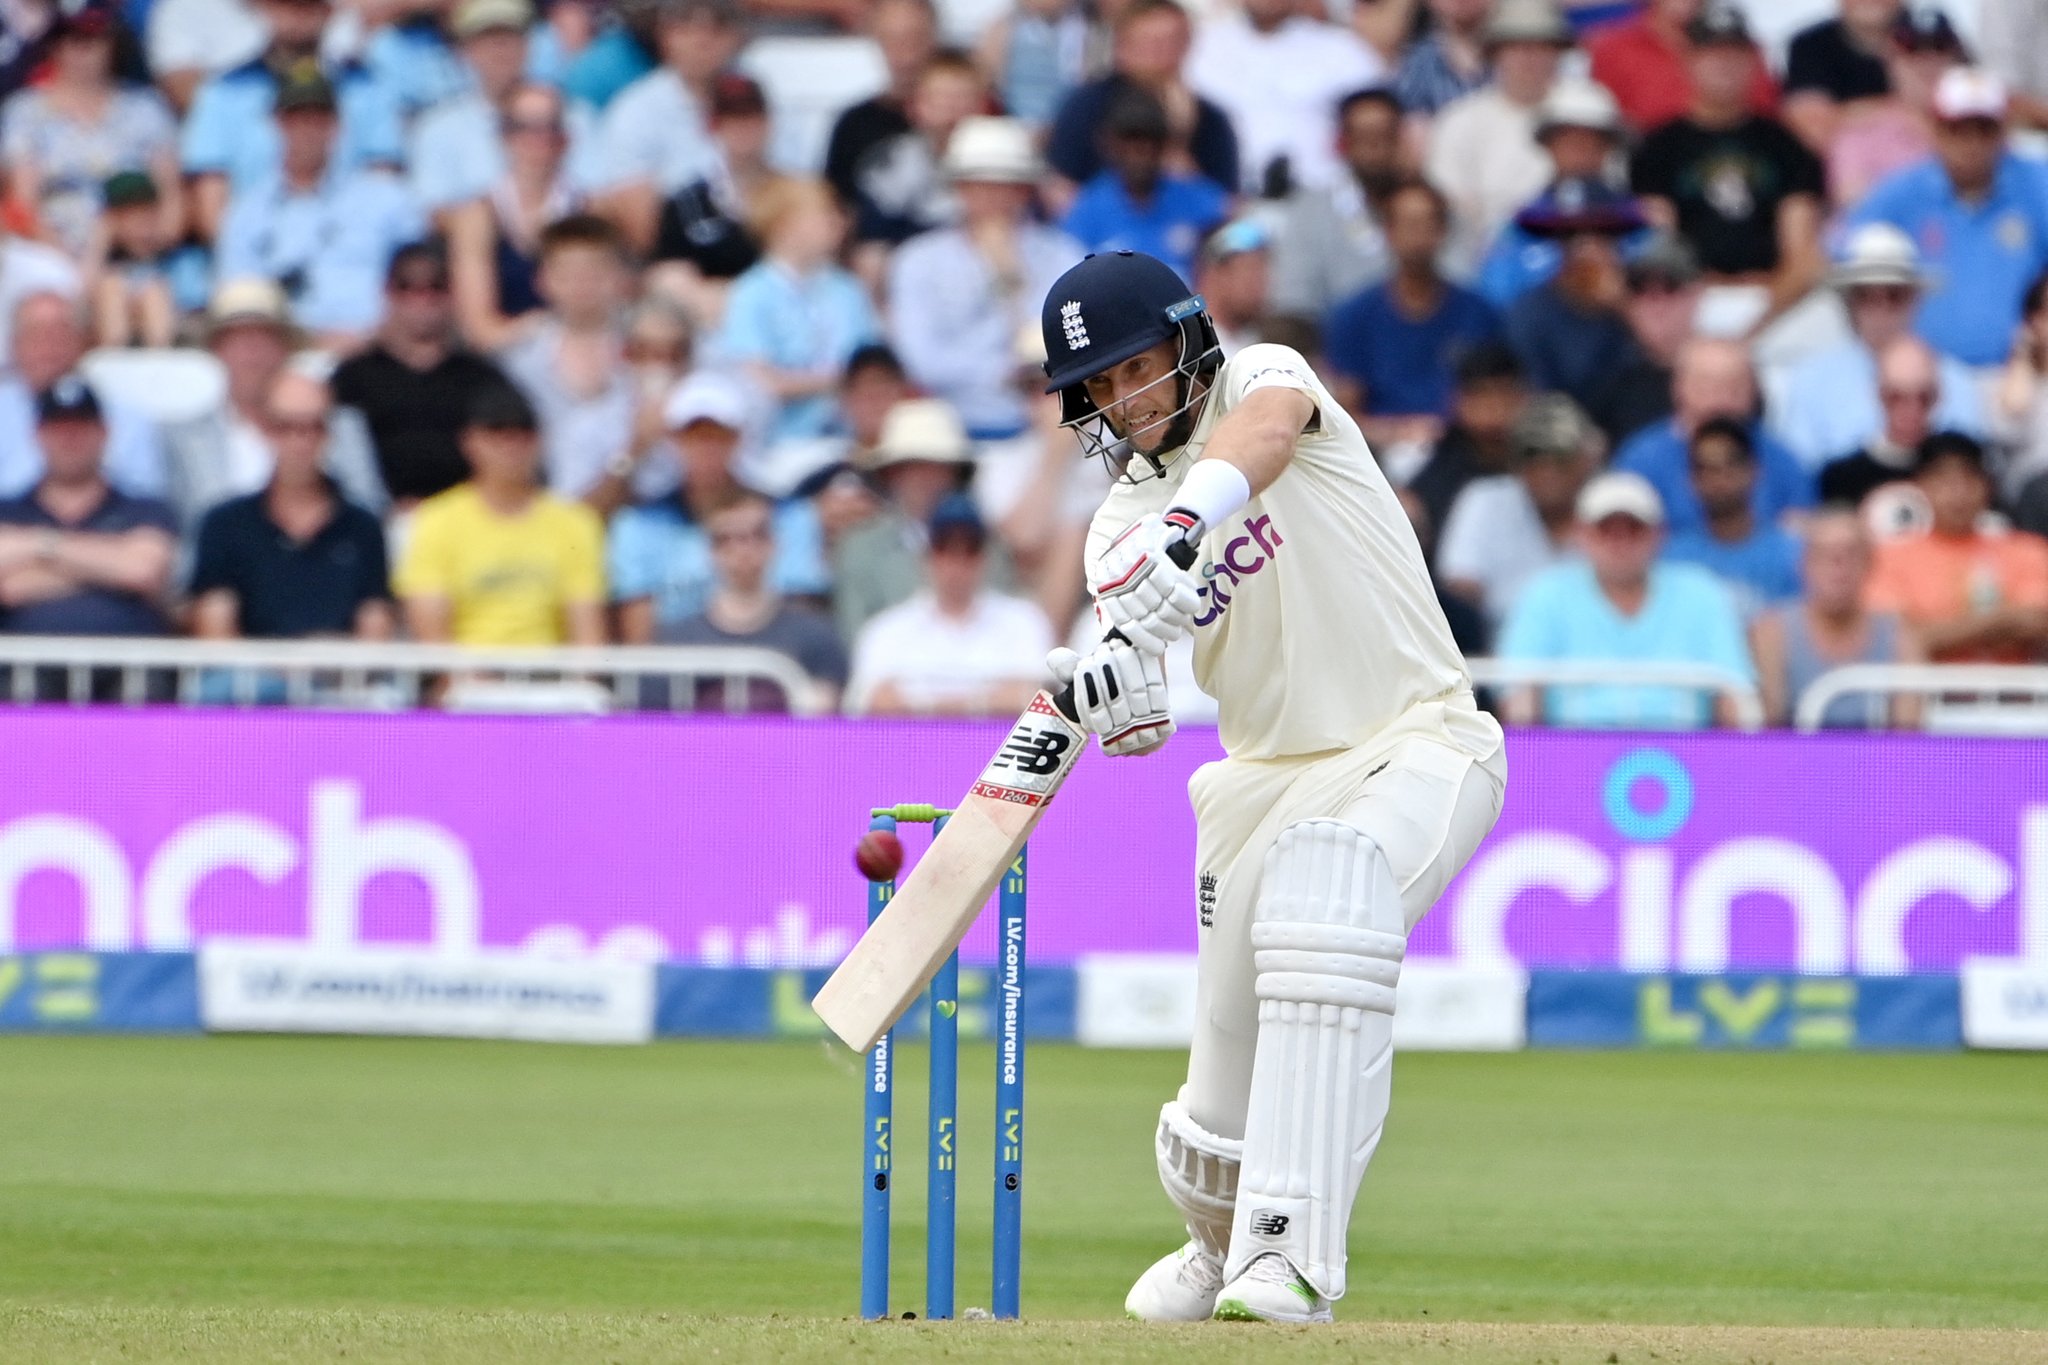 Steve Harmison Highlights Joe Root And Bowling Performance As England's Biggest Positives From The First Test Against India